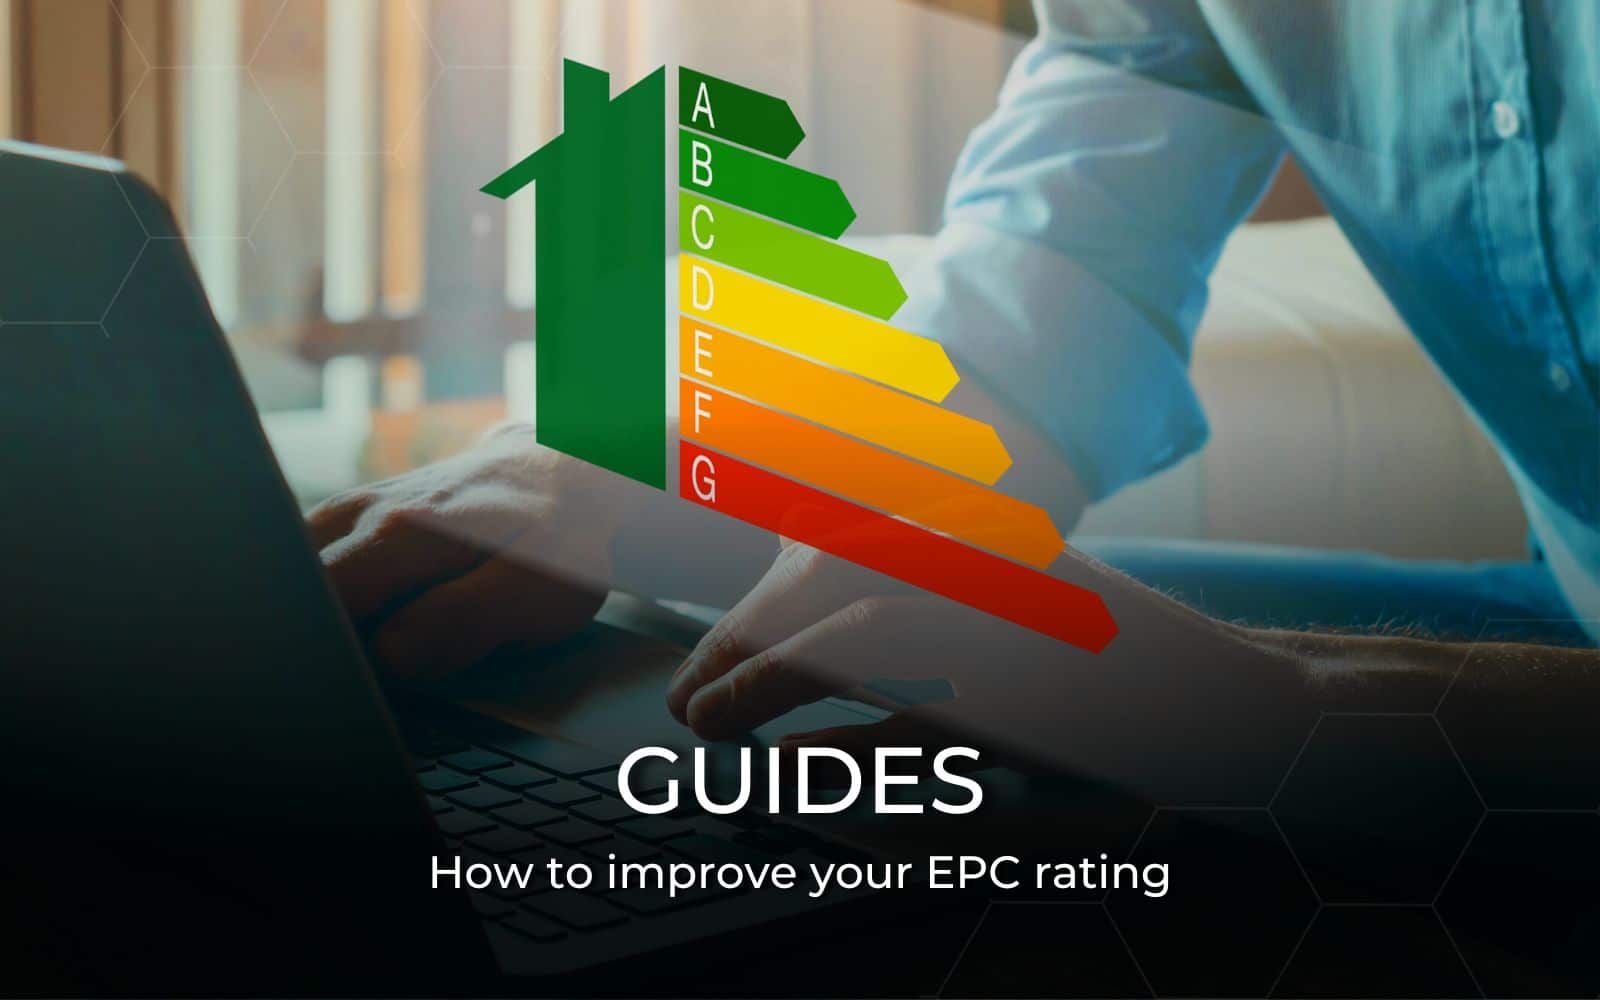 How to improve EPC rating